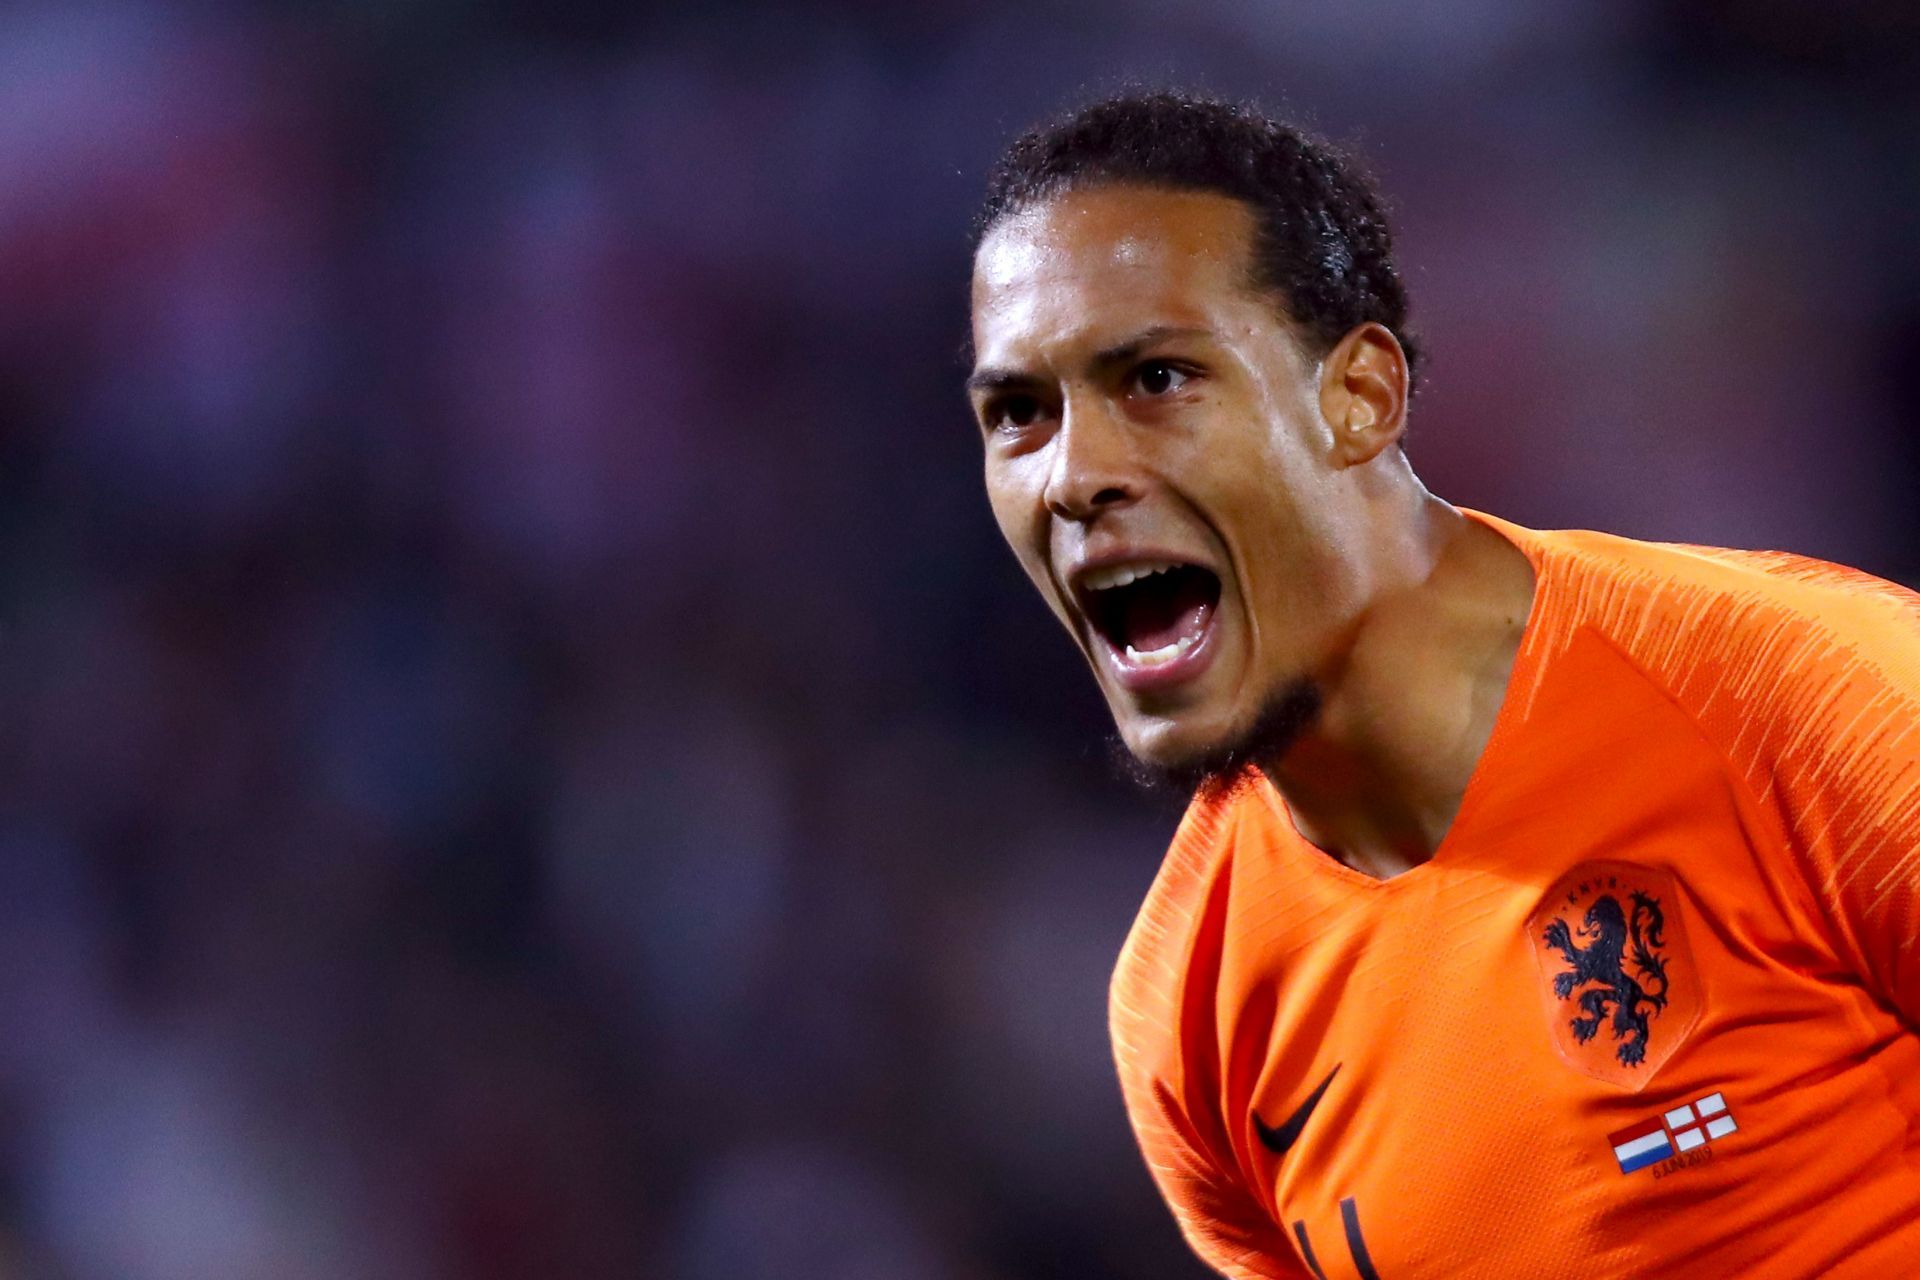 Virgil van Dijk is among the best players in the world